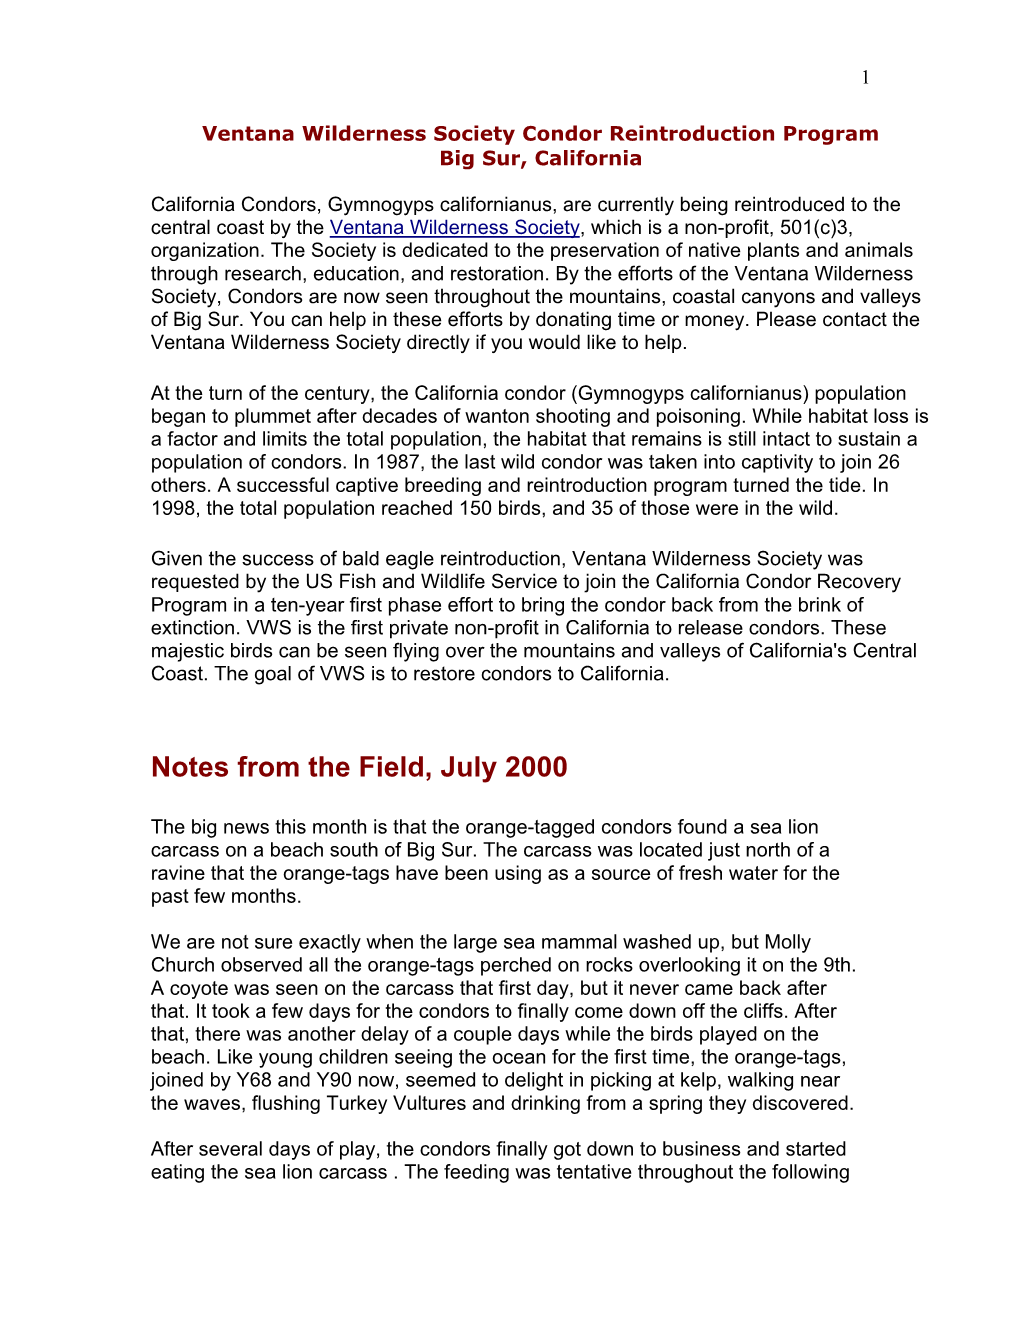 Notes from the Field, July 2000